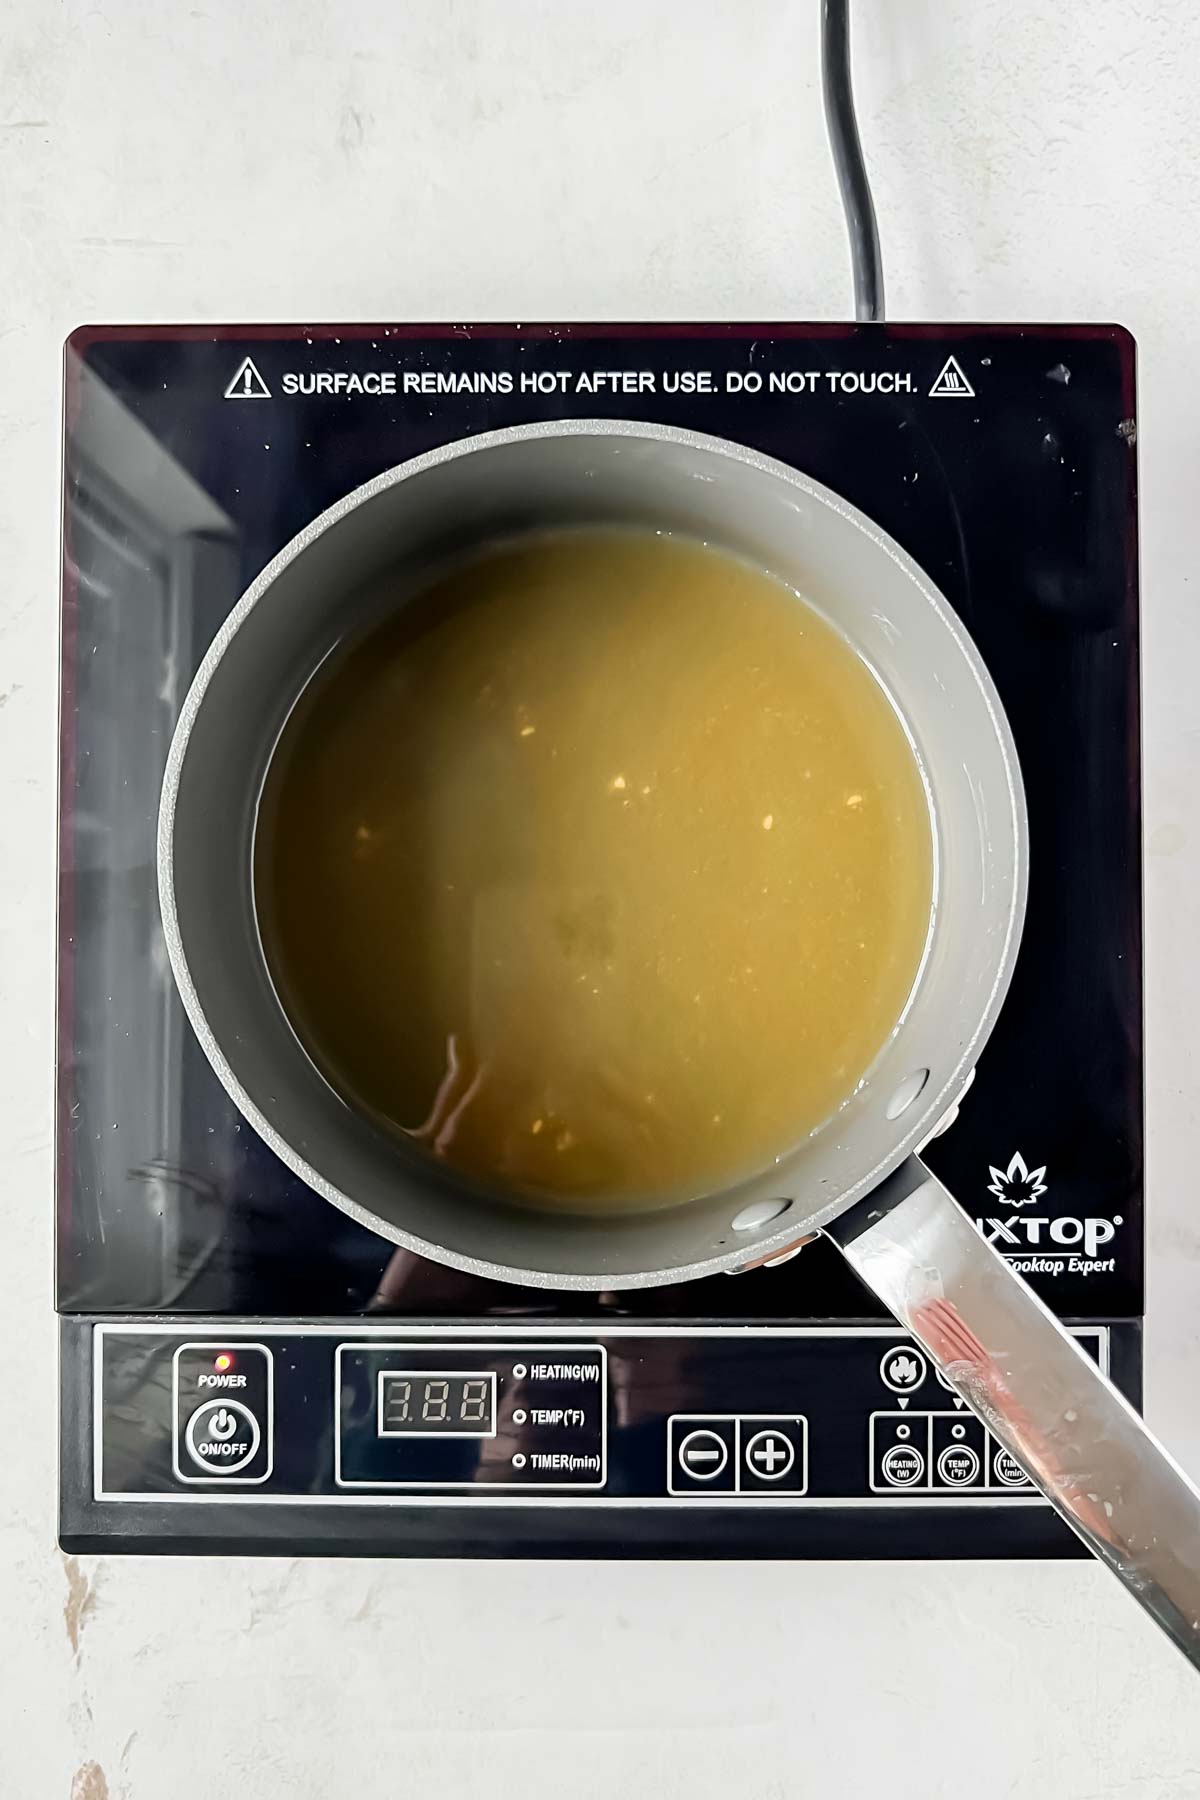 melted butter in small sauce pot on electric burner.